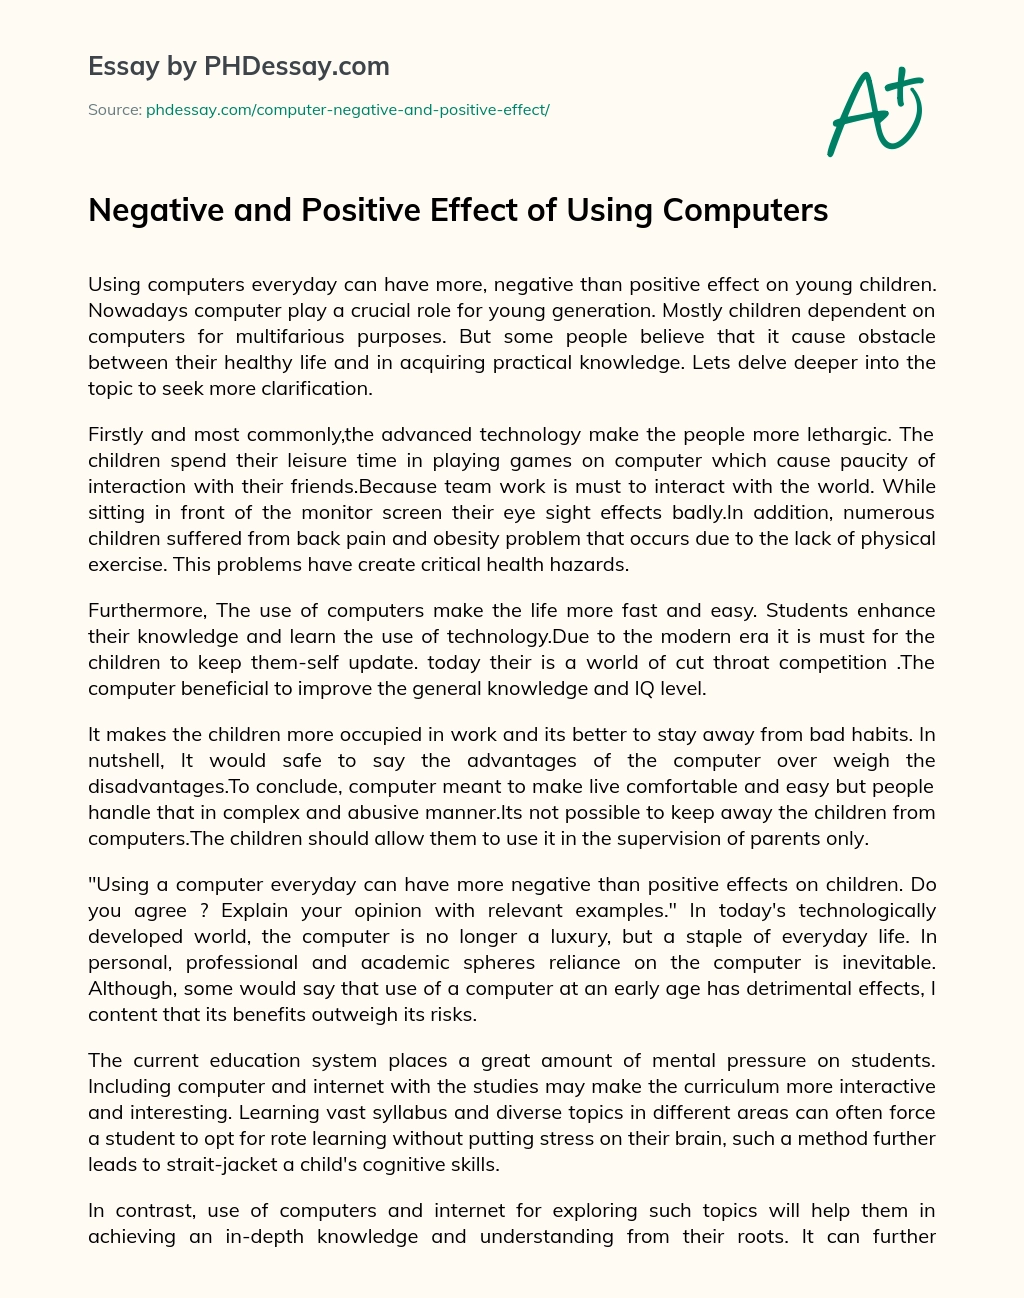 Negative and Positive Effect of Using Computers essay